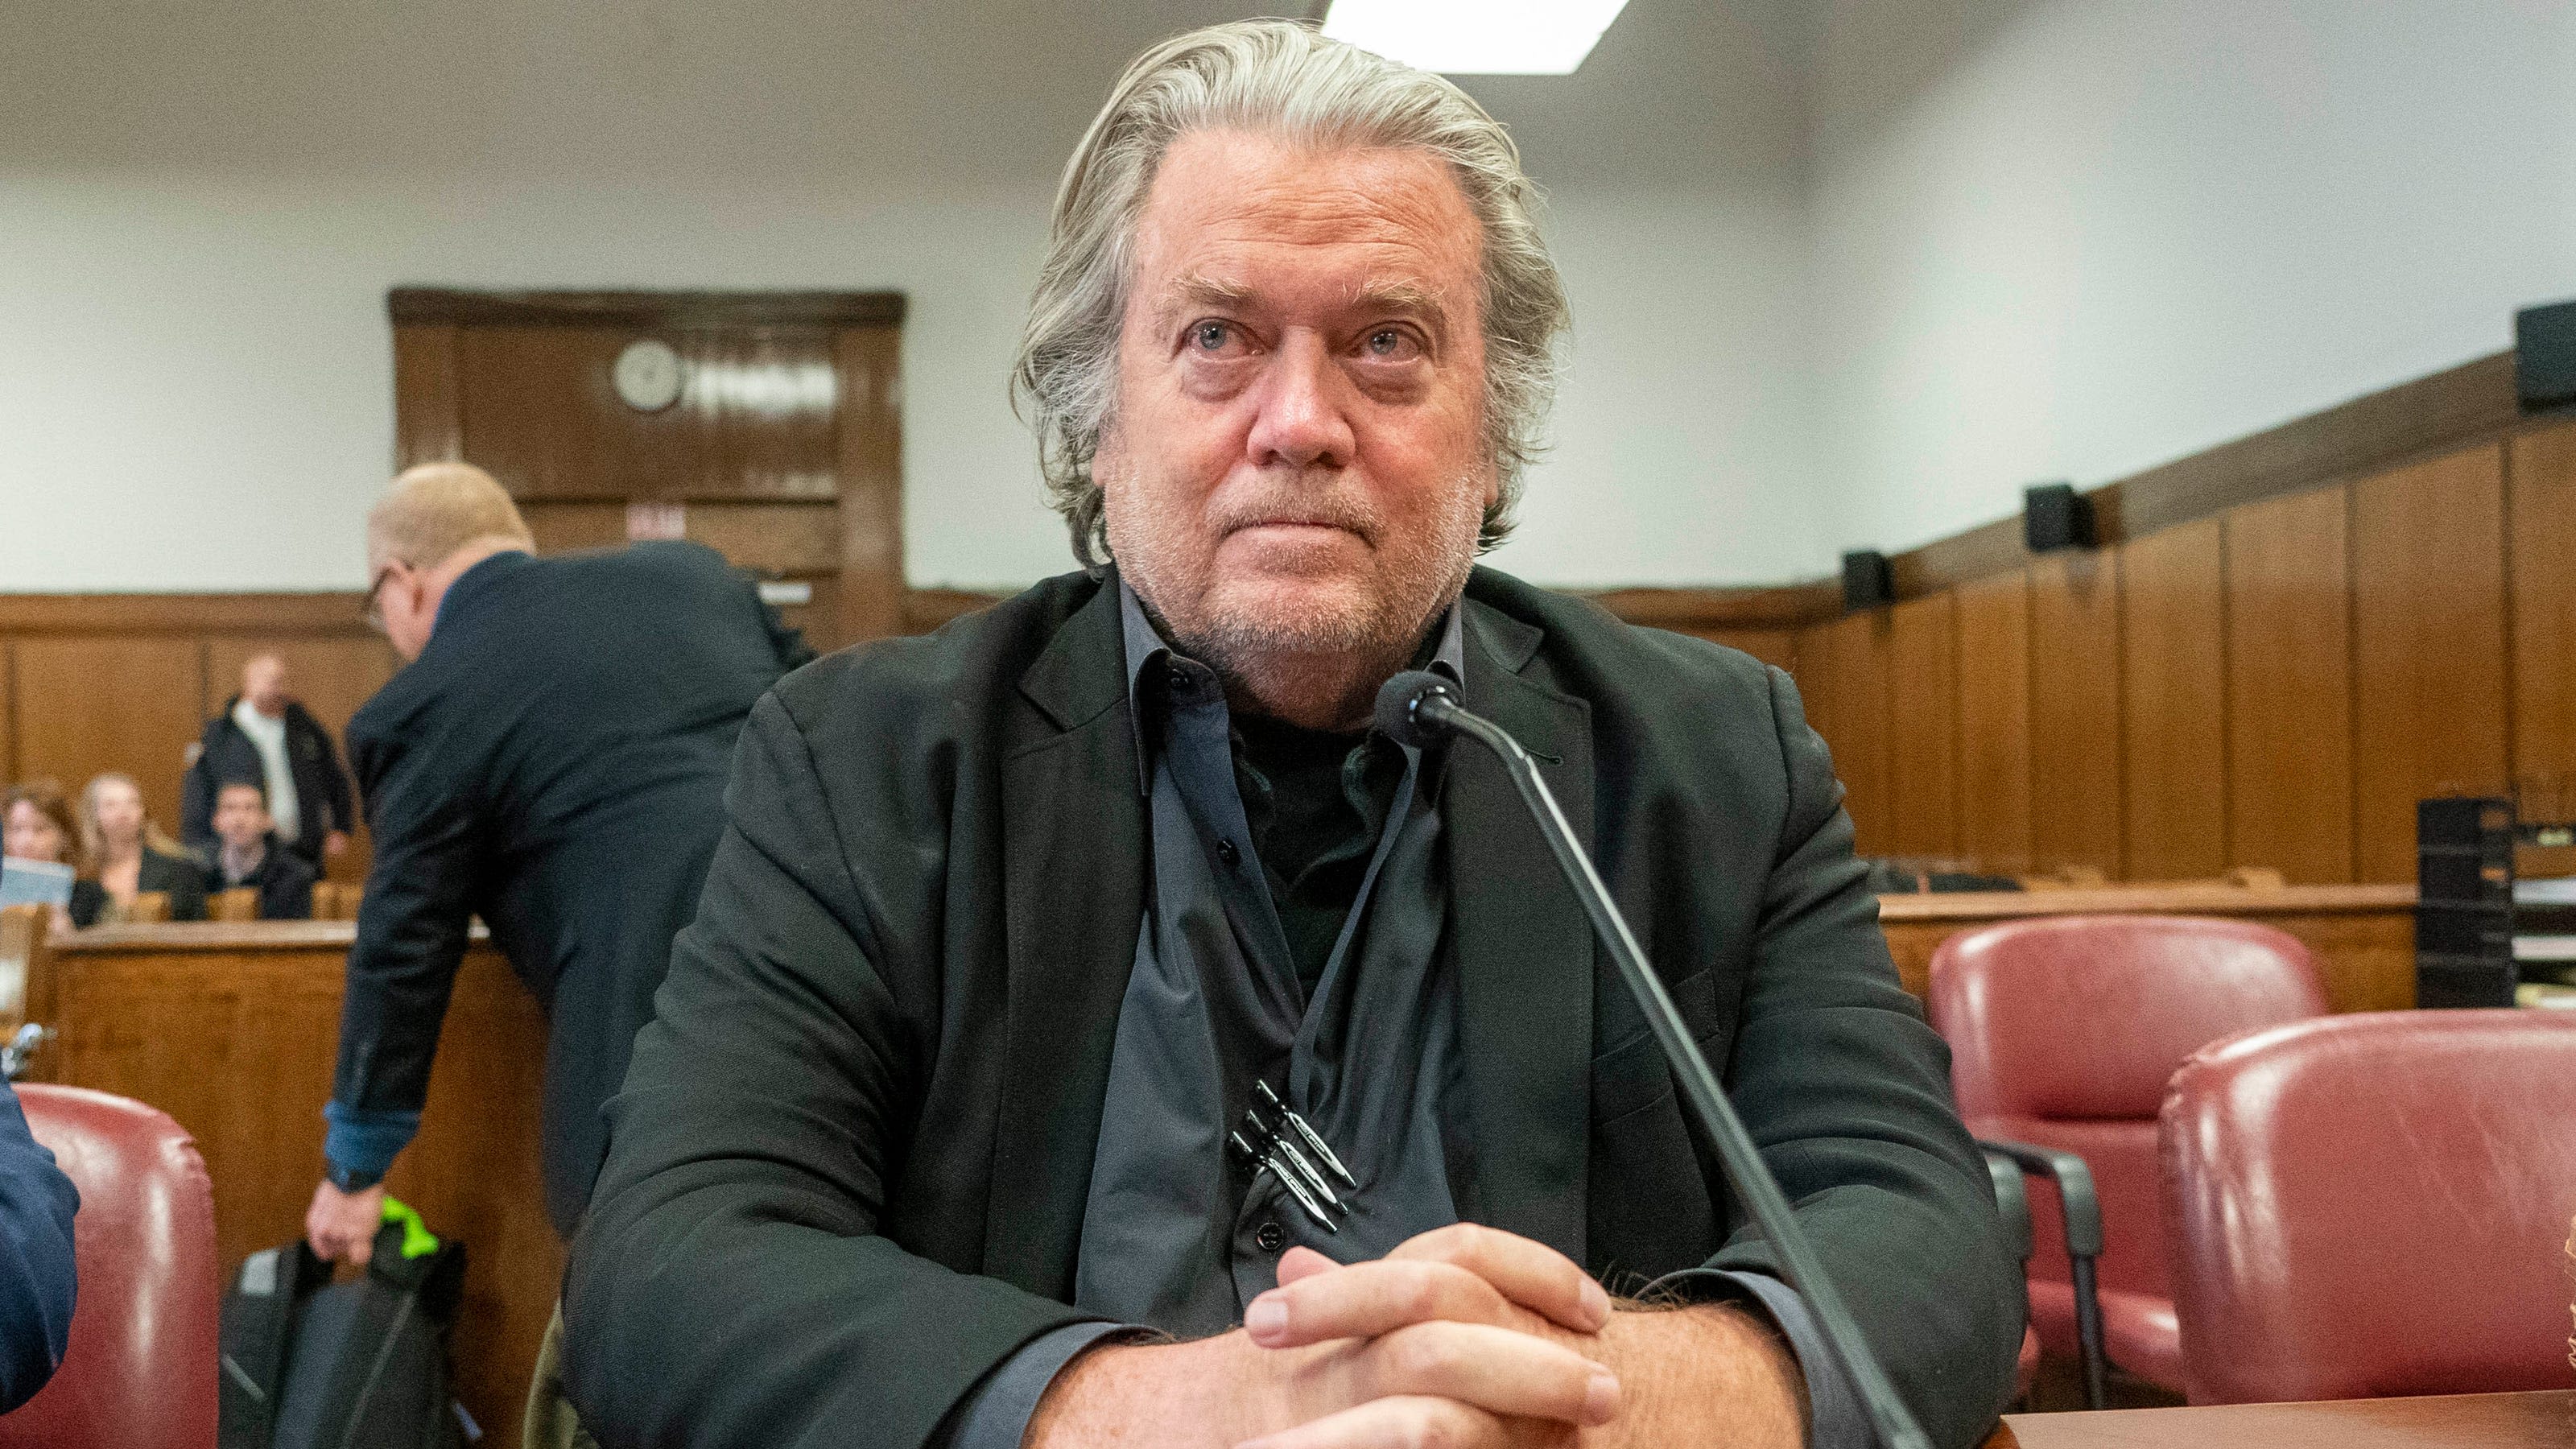 Steve Bannon, heading to prison, says Biden withdrawal would backfire for Trump